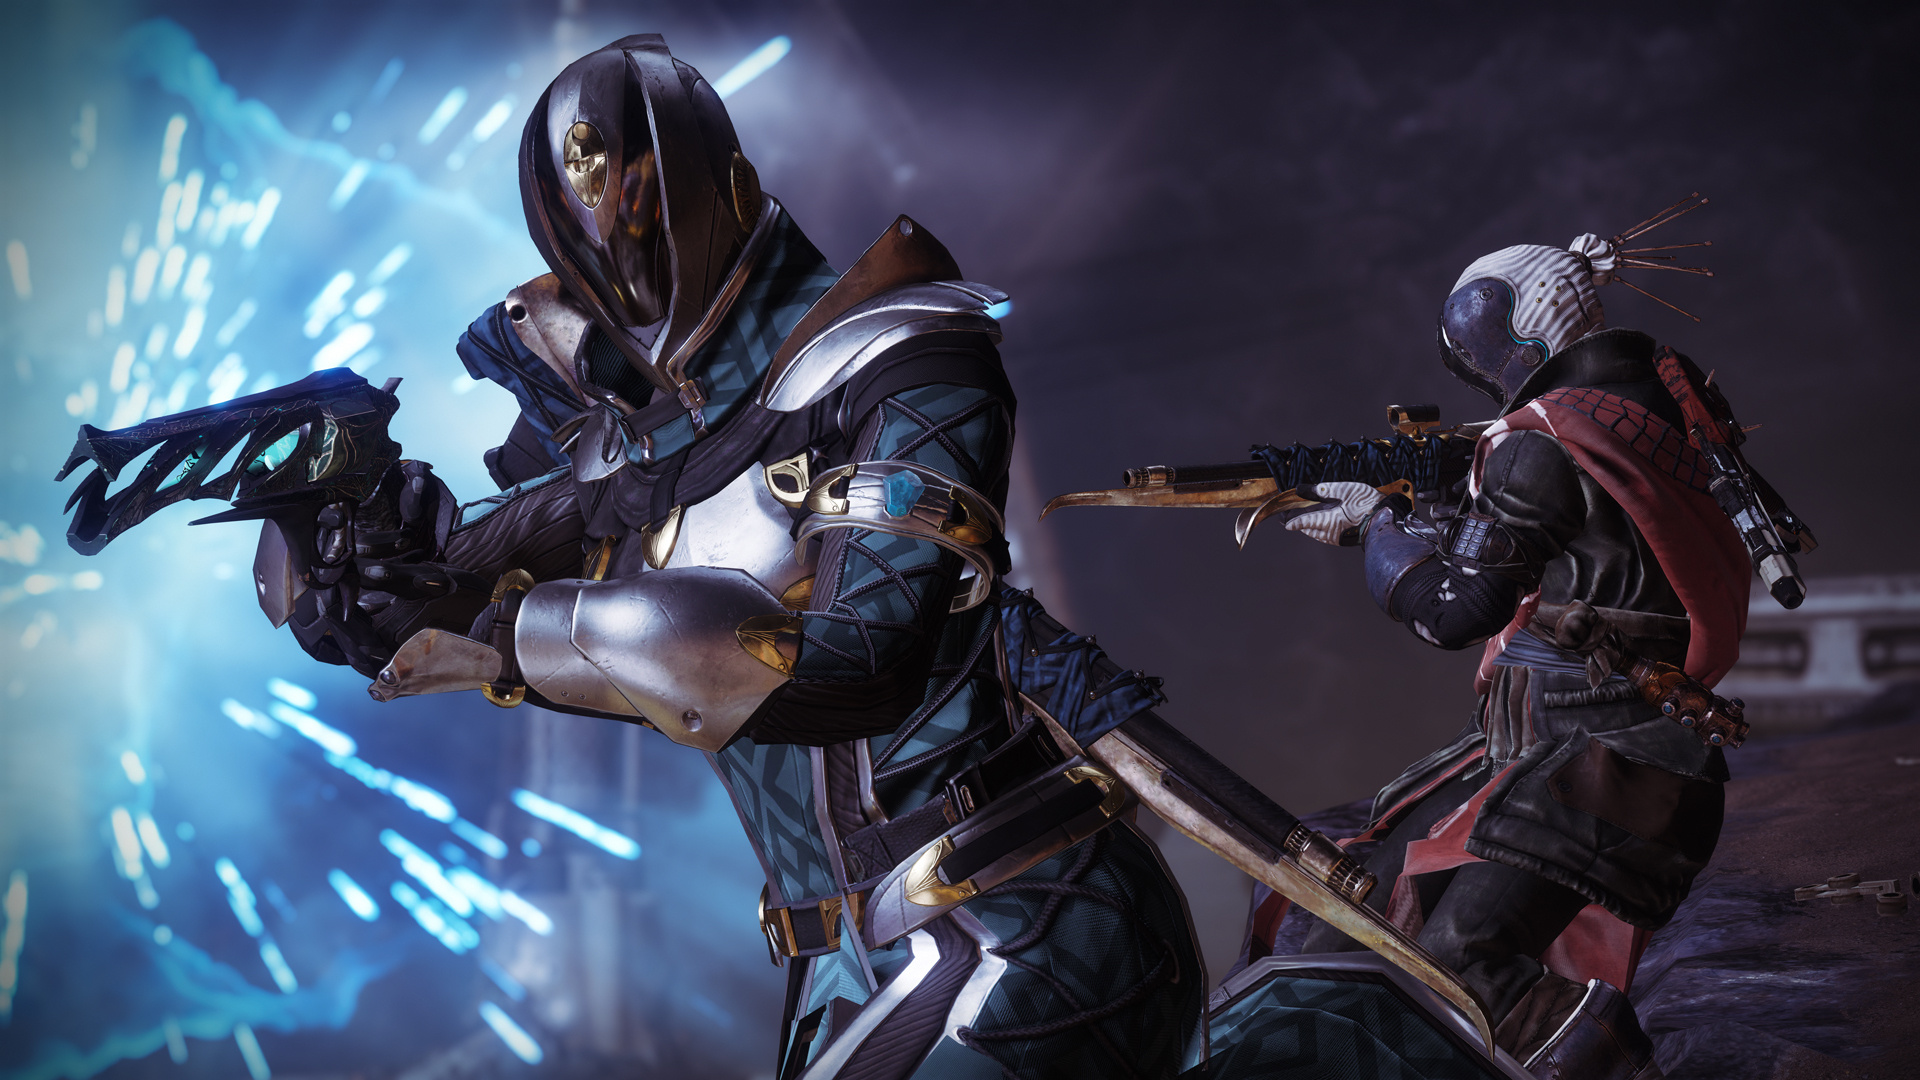 destiny-2-ps4-patch-1-24-out-now-ahead-of-forsaken-launch-push-square